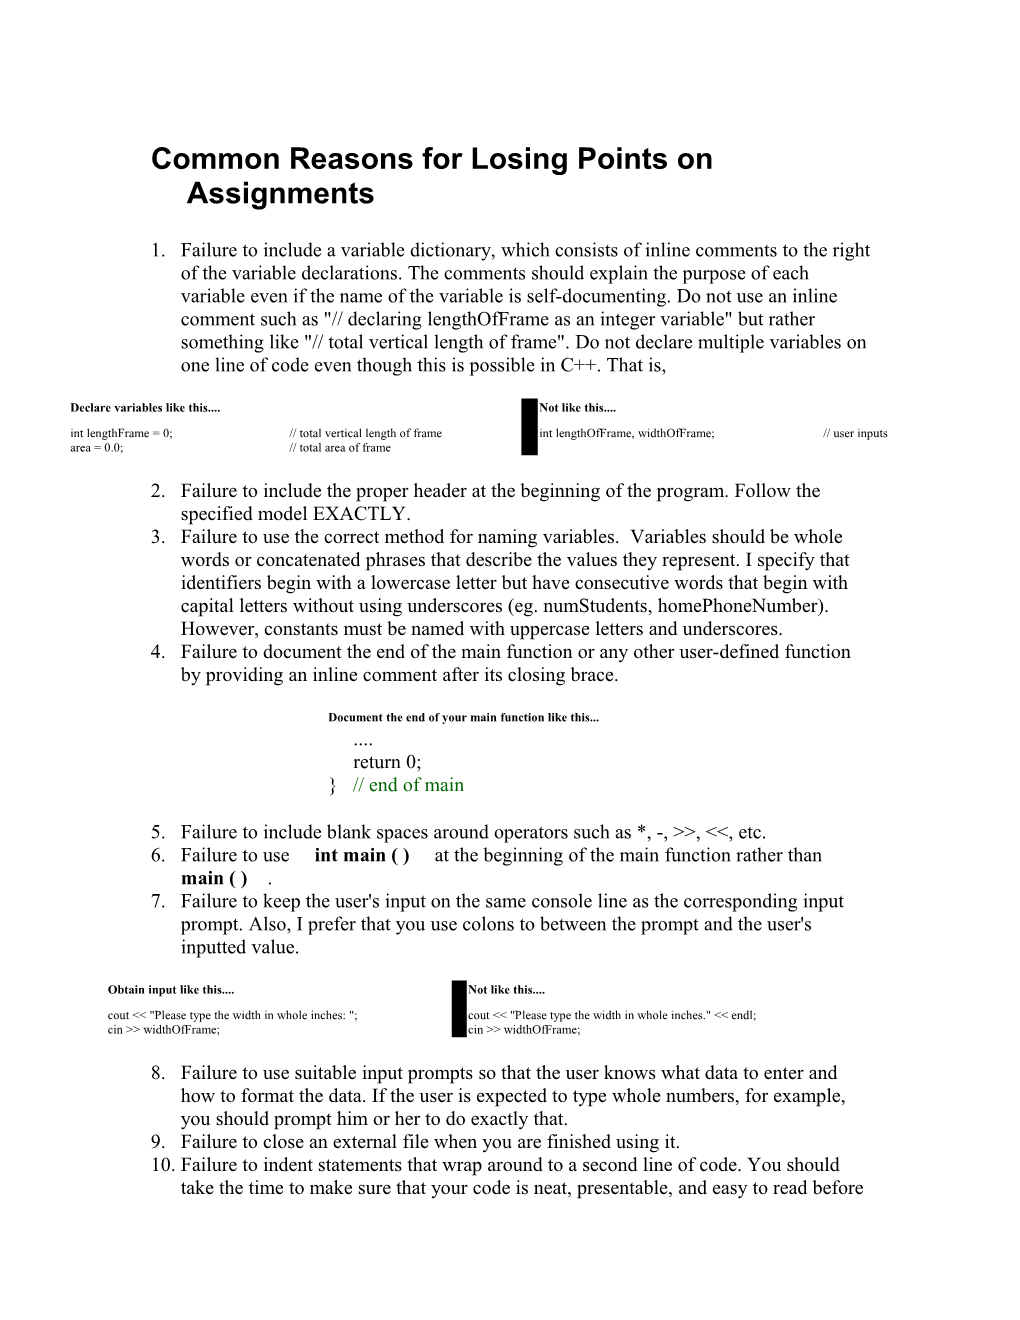 Common Reasons for Losing Points on Assignments